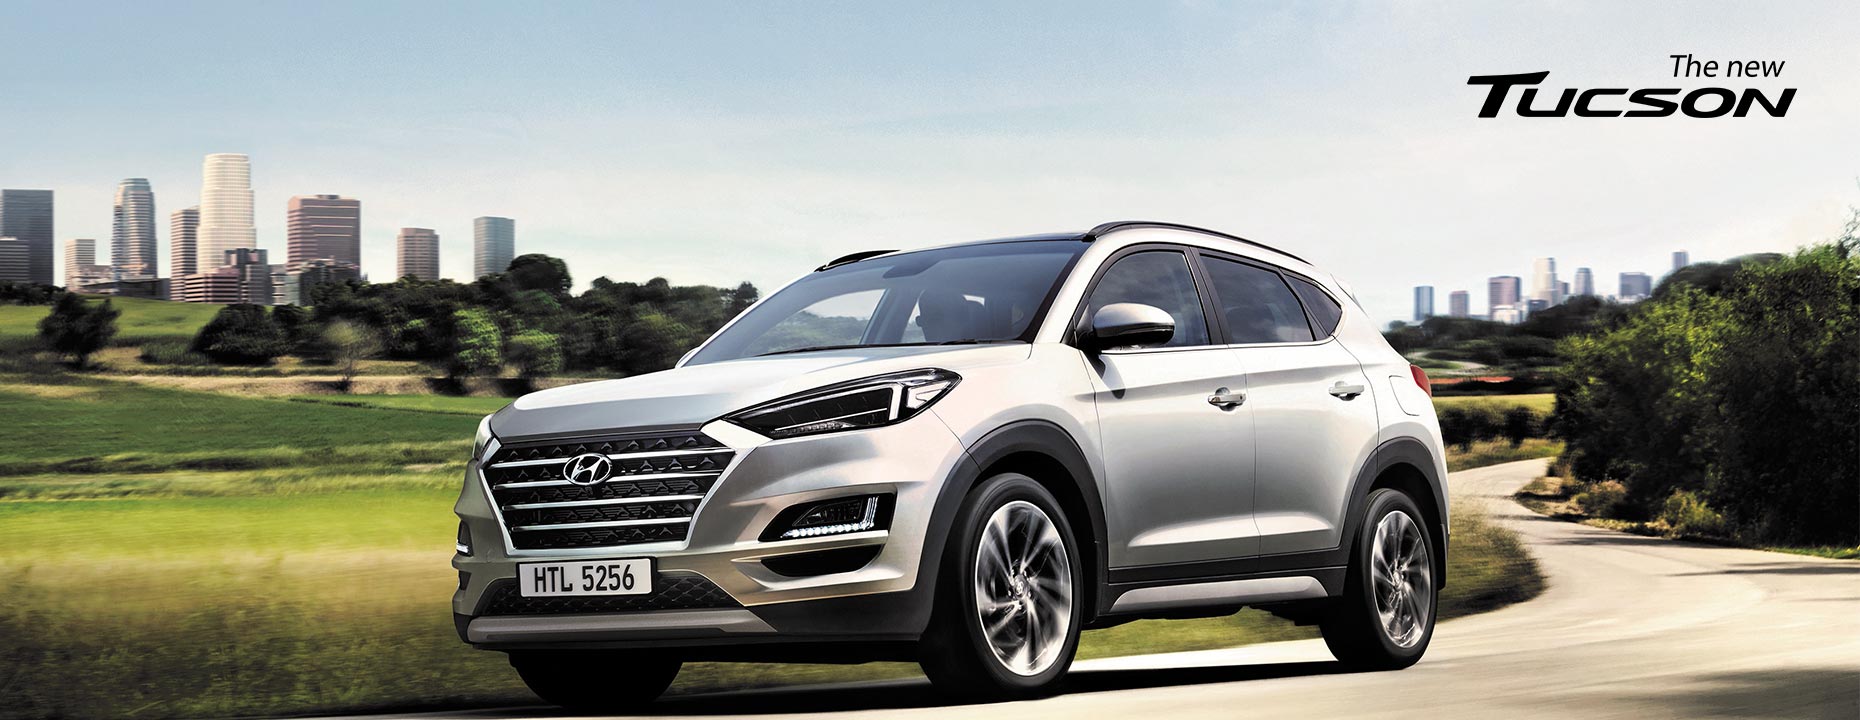 Hyundai Nishat Motor launched “Hyundai TUCSON” in a first ever digital event in Pakistan